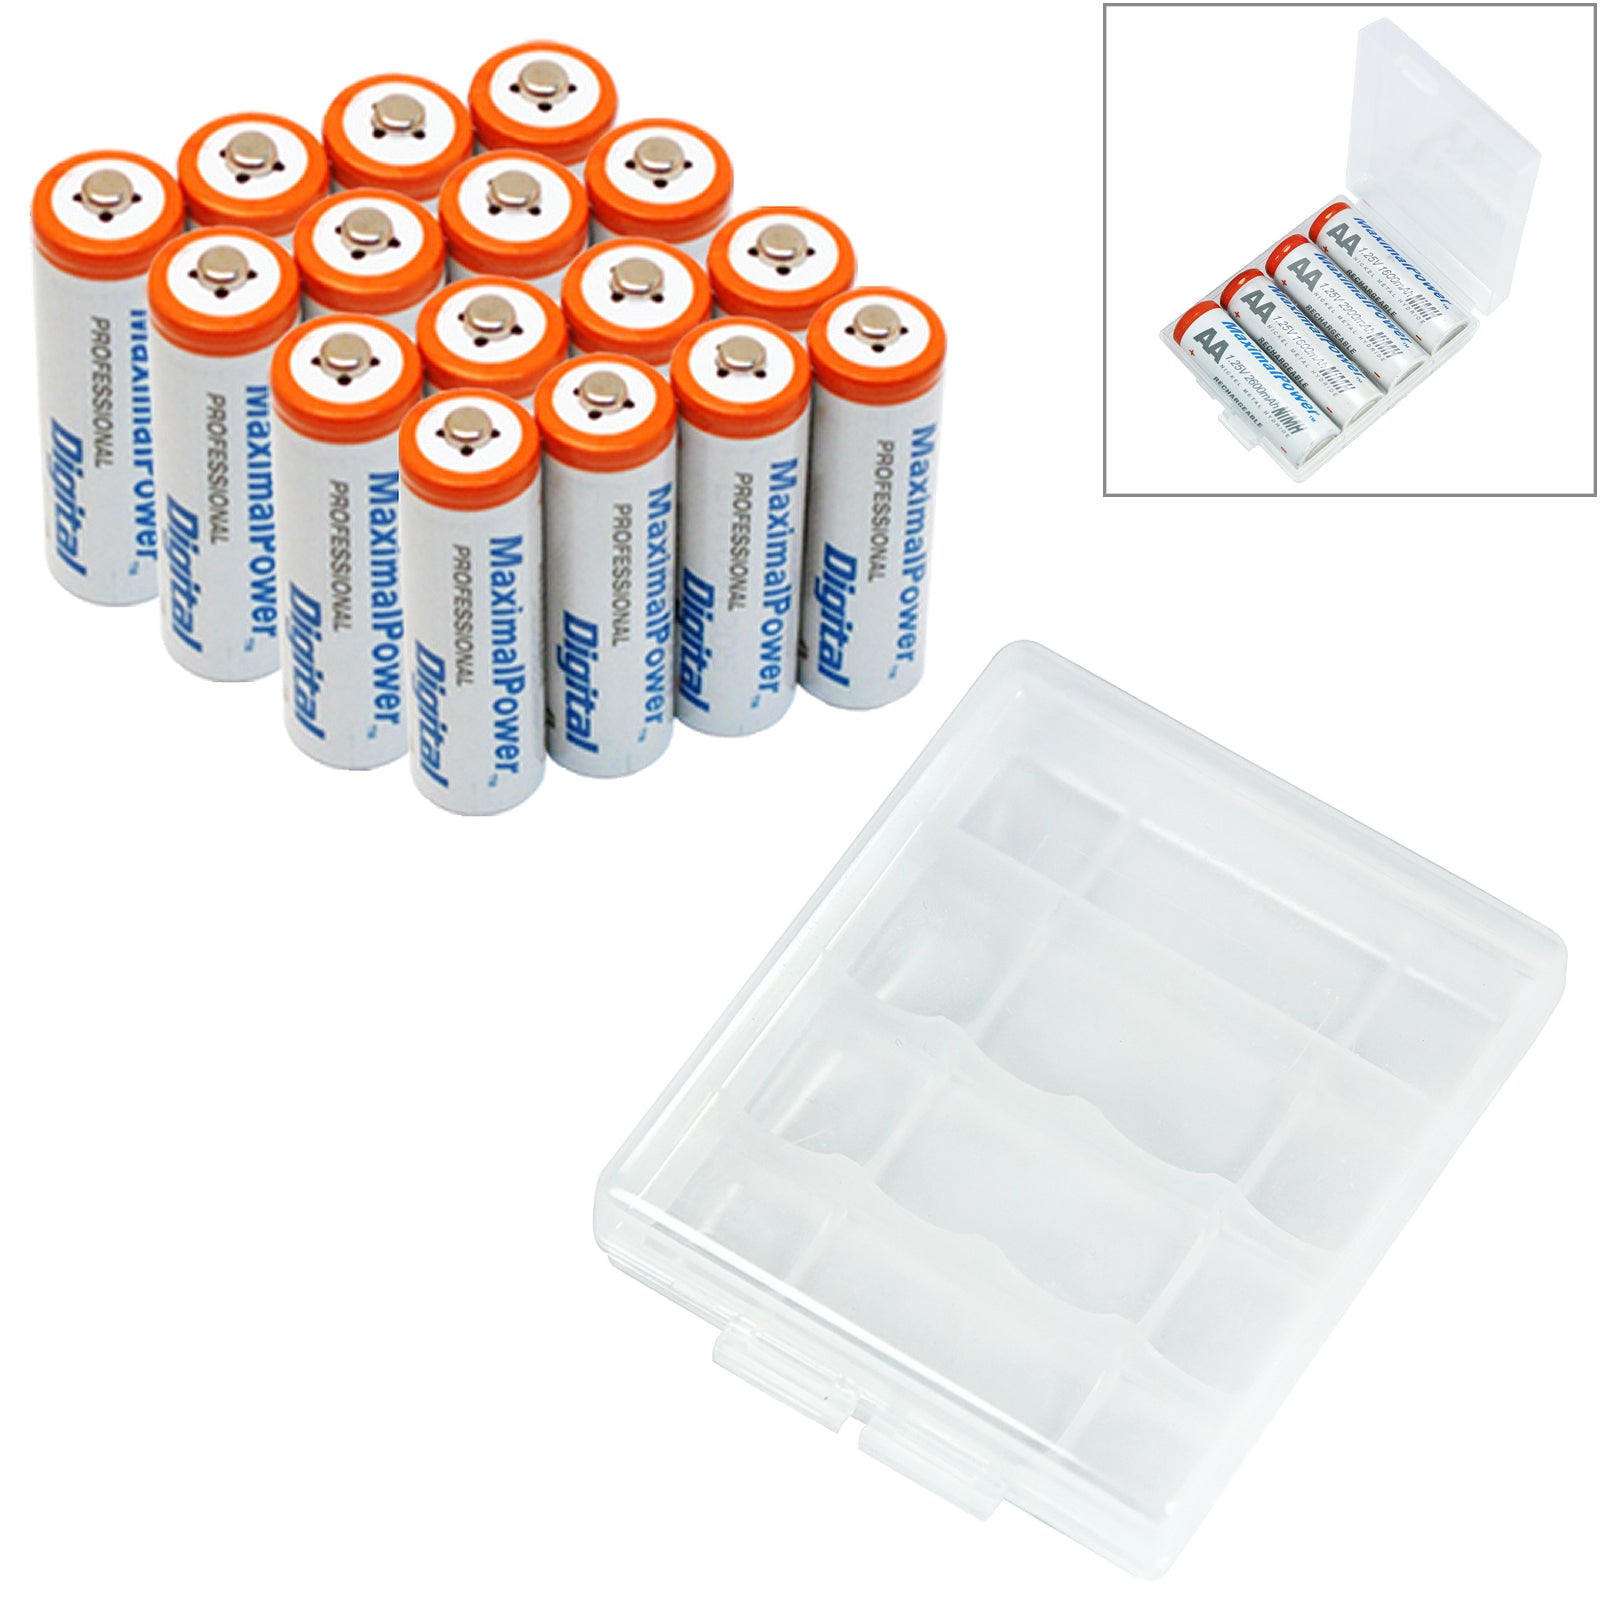 MaximalPower AAA Rechargeable Batteries 1200mAh High Capacity Performance & Long Lasting Per-Charged Ni-MH Triple A Battery 1.2V, Pack of 4 (Includes Free Case)